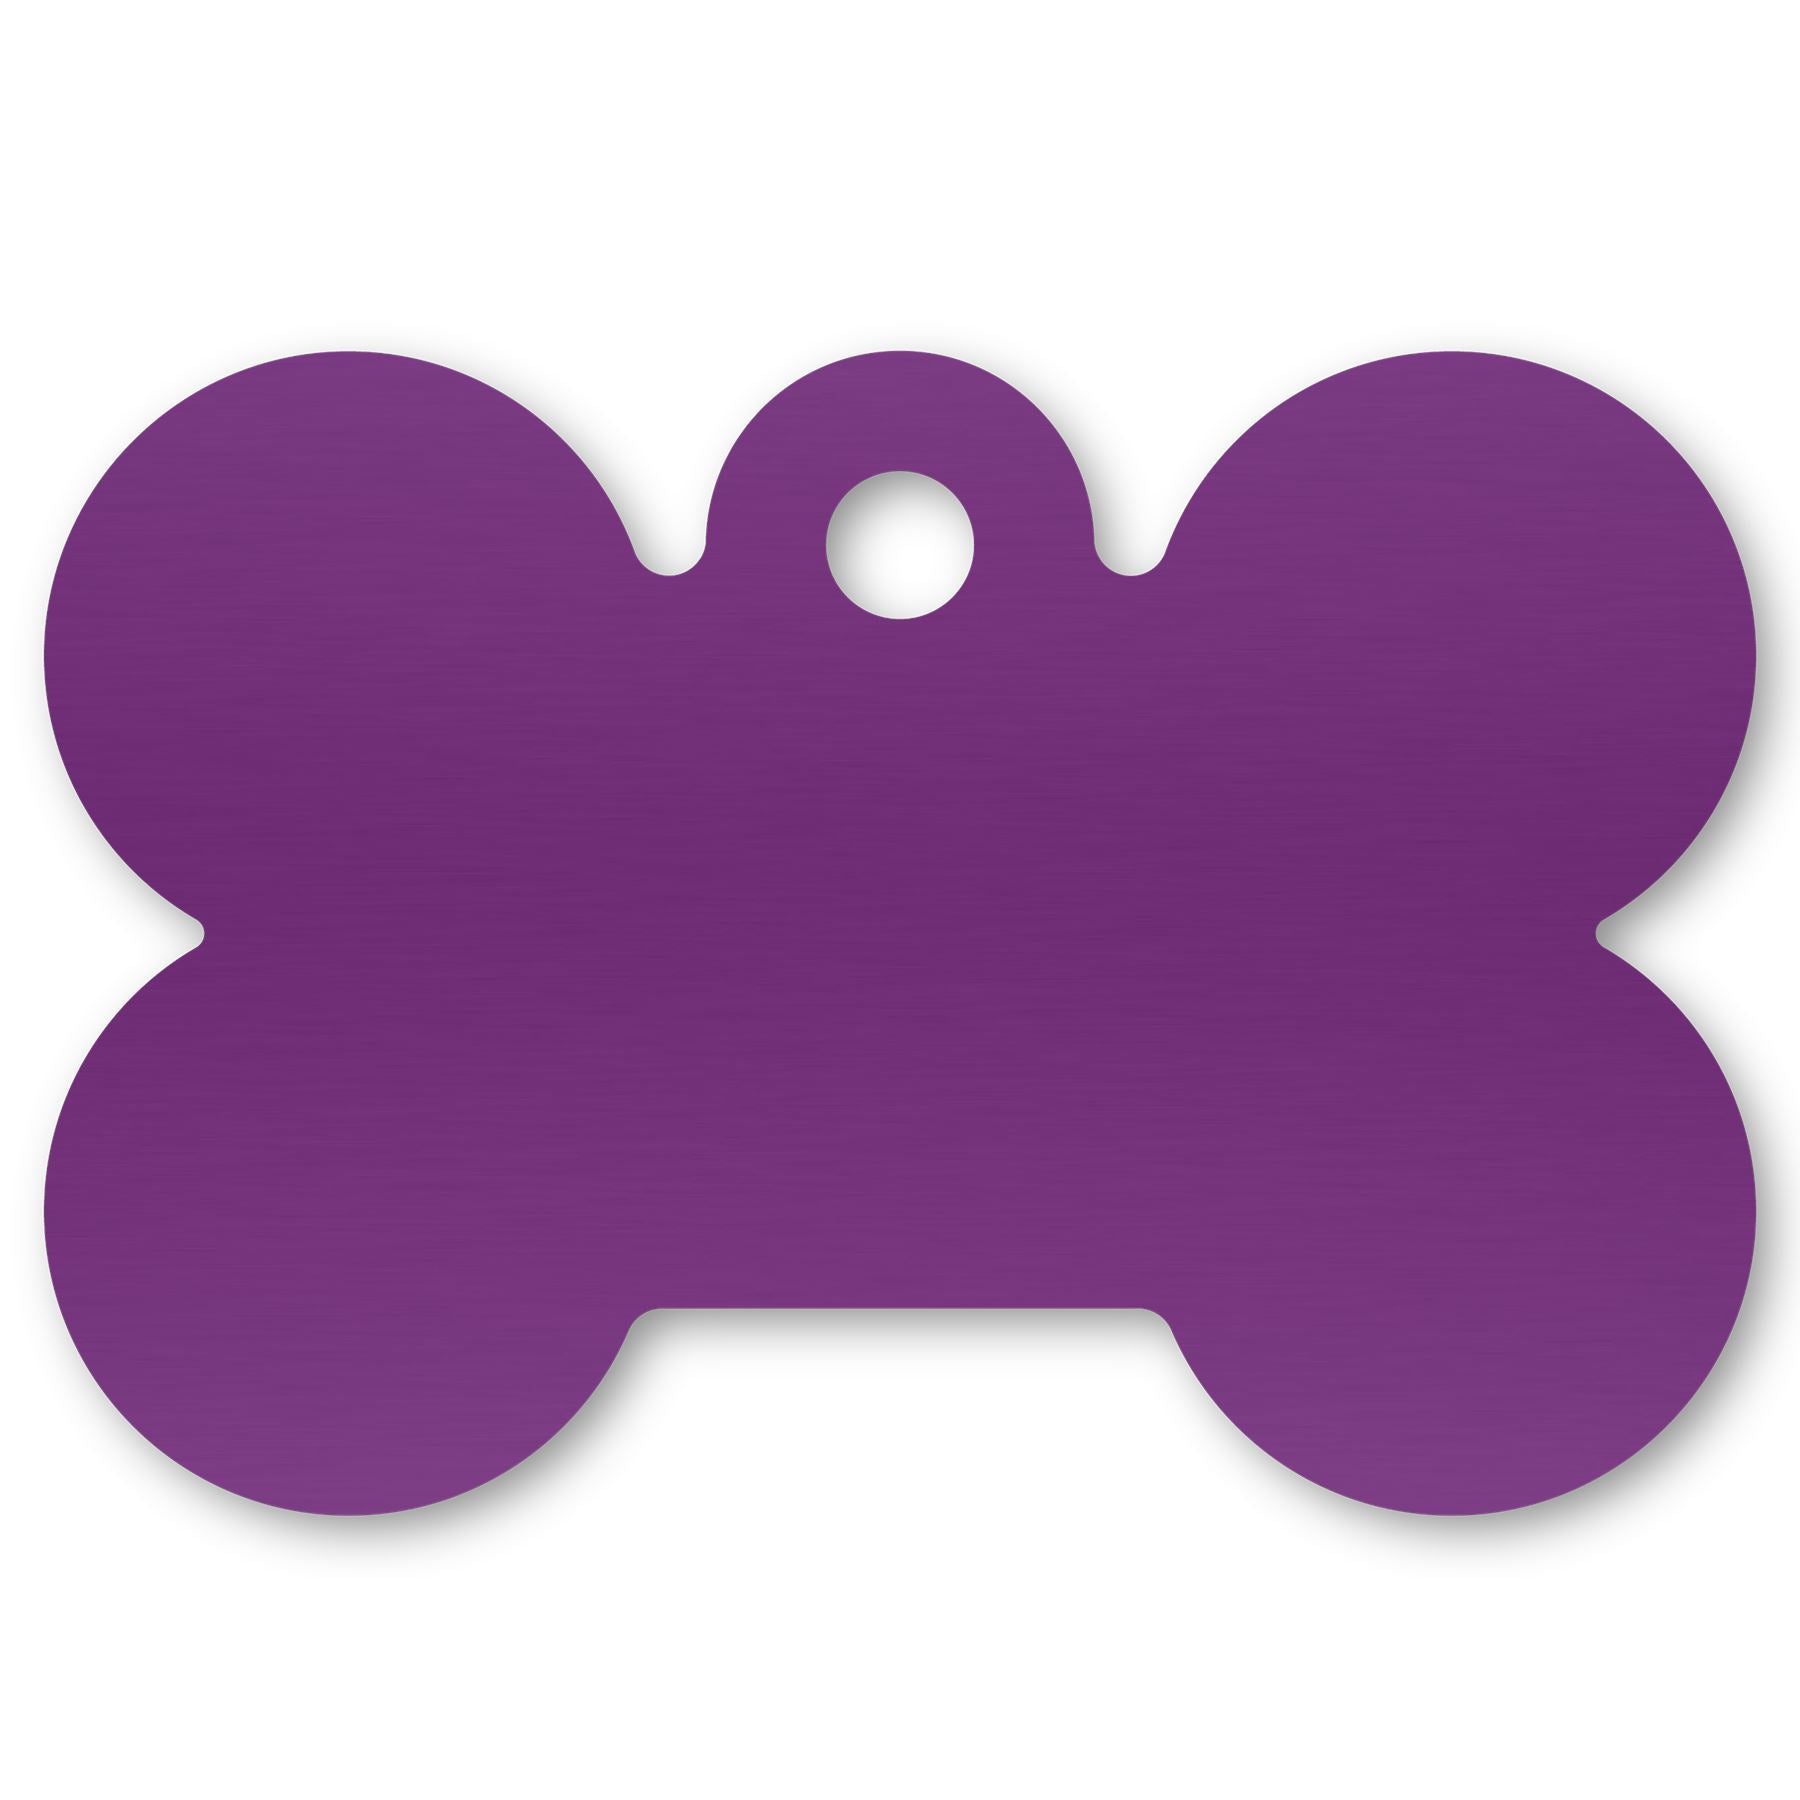 Anodized Aluminum Dog Bone Shaped Tags, 1-1/16" x 1-9/16" with 1/8" Hole, Laser Engraved Metal Tags Craftworks NW Purple 